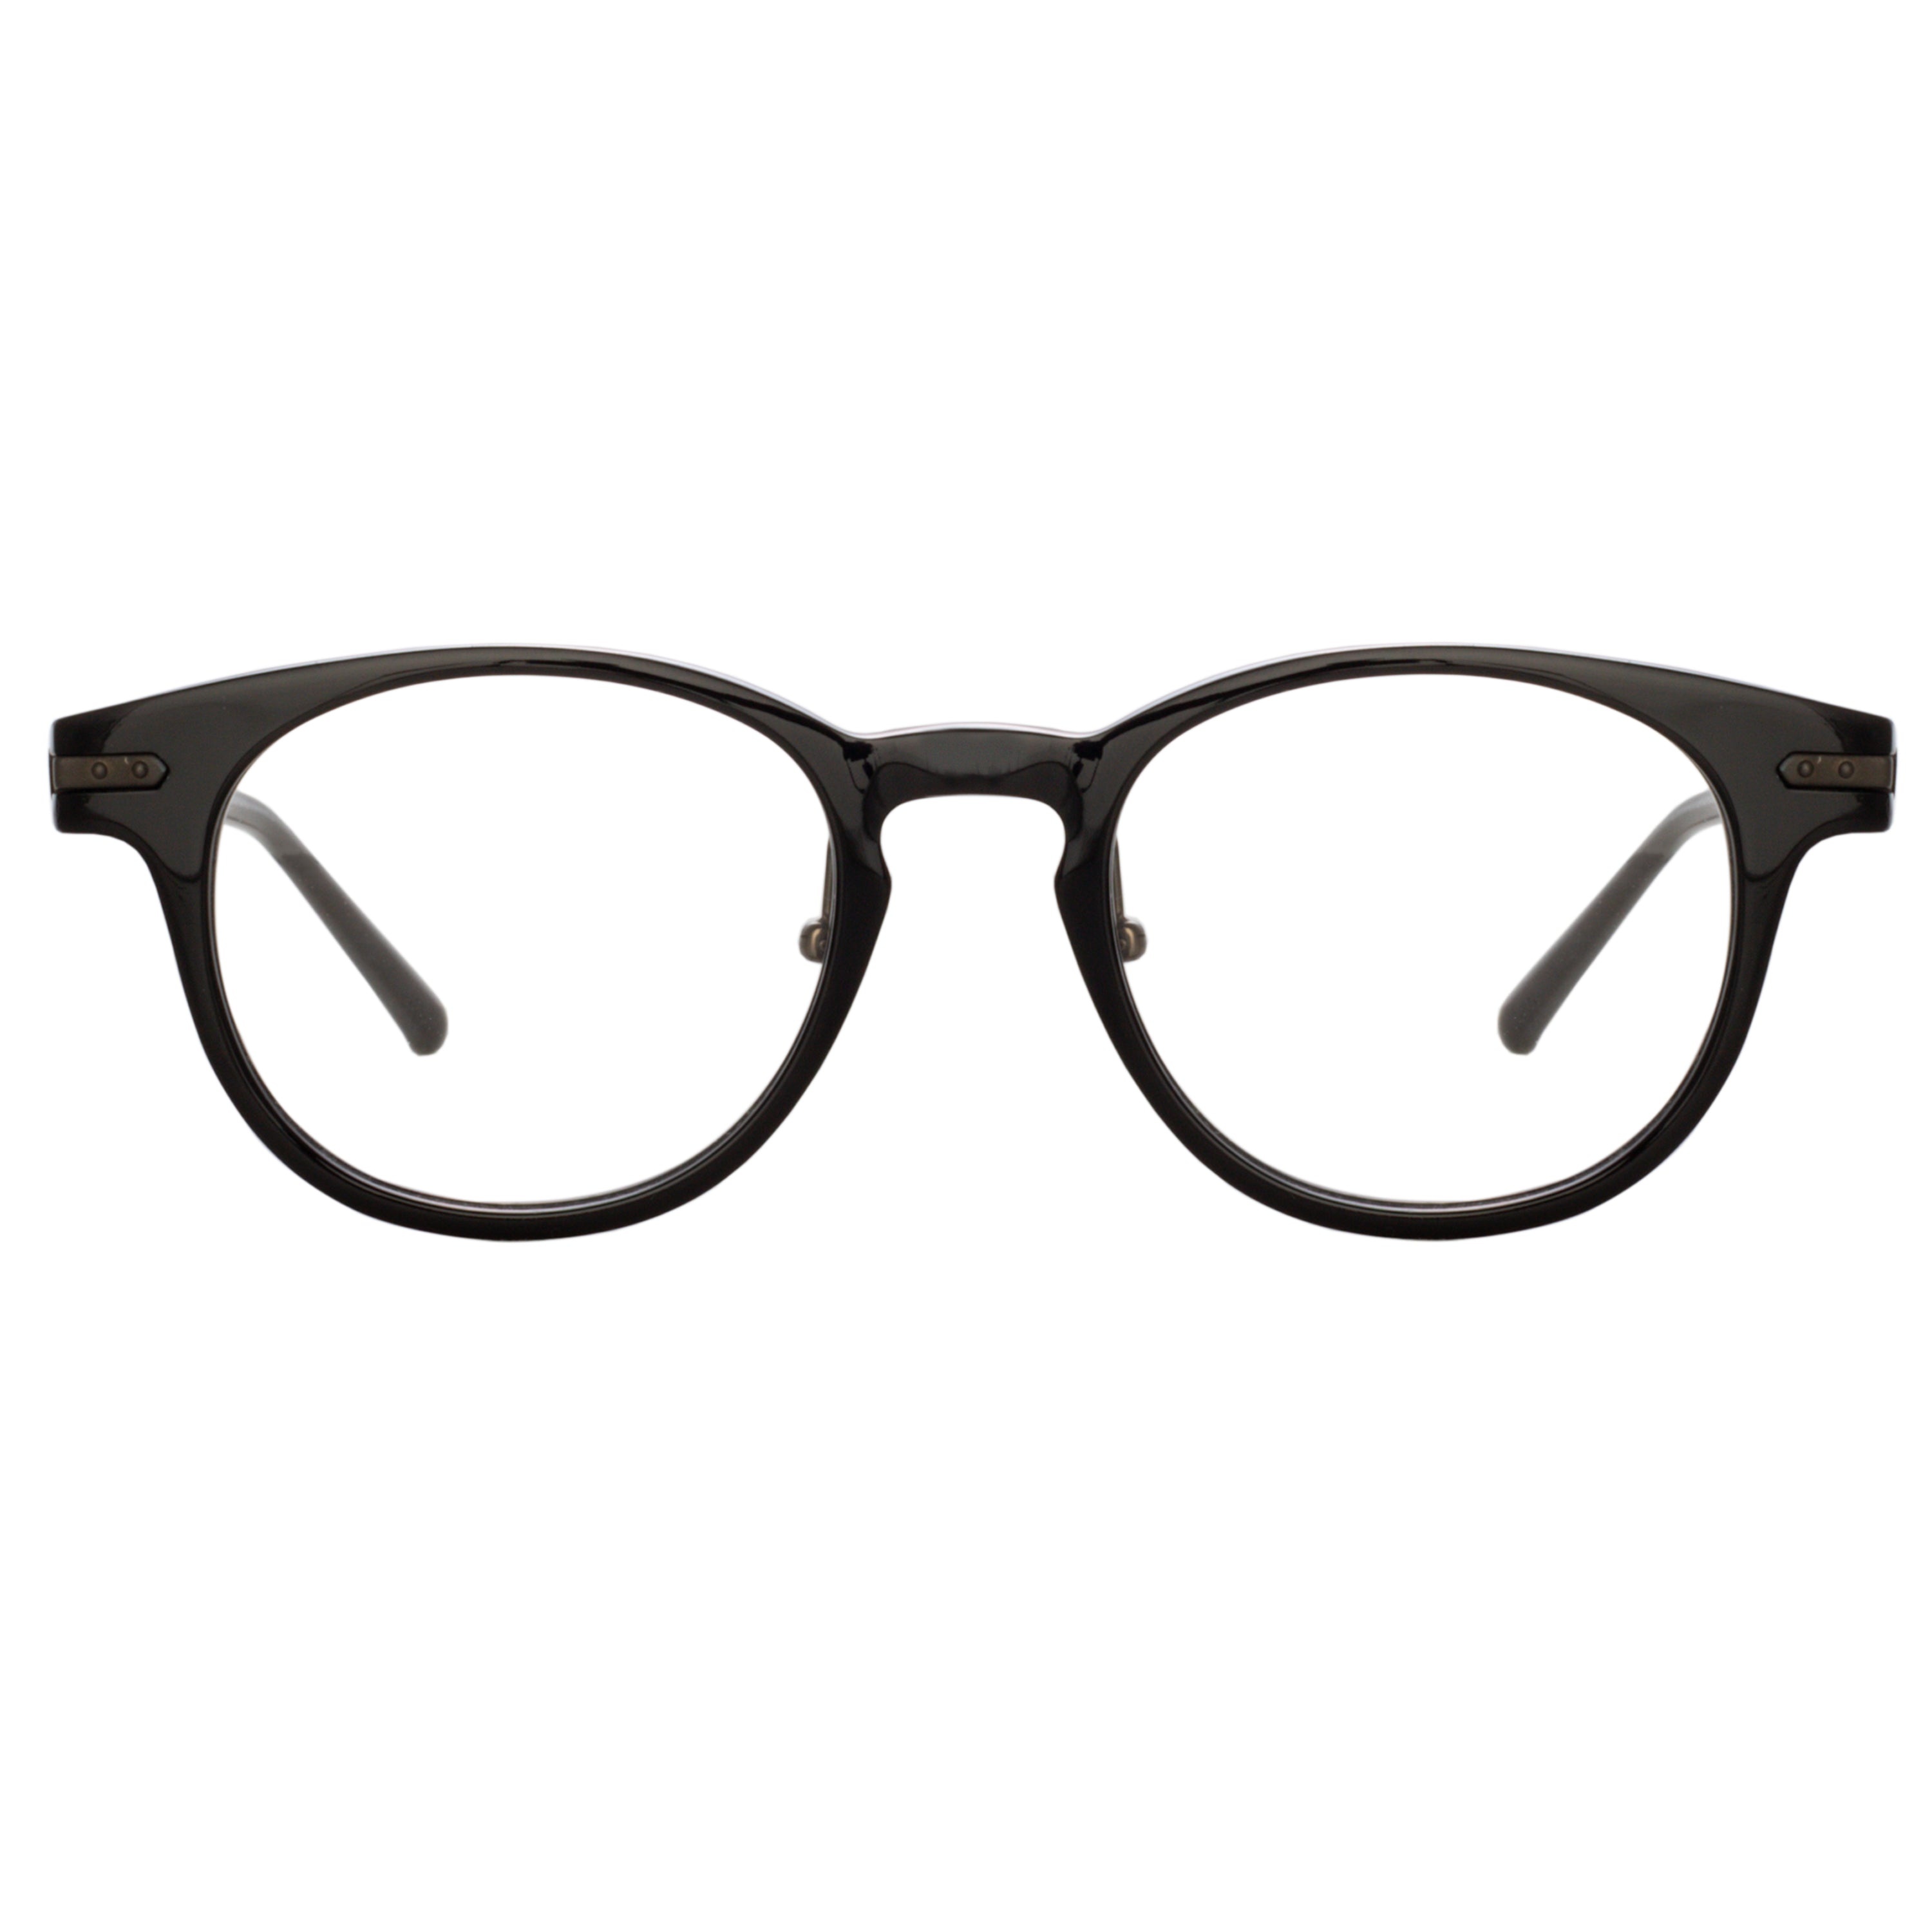 BAY OPTICAL D-FRAME IN BLACK AND NICKEL (ASIAN FIT) - 2